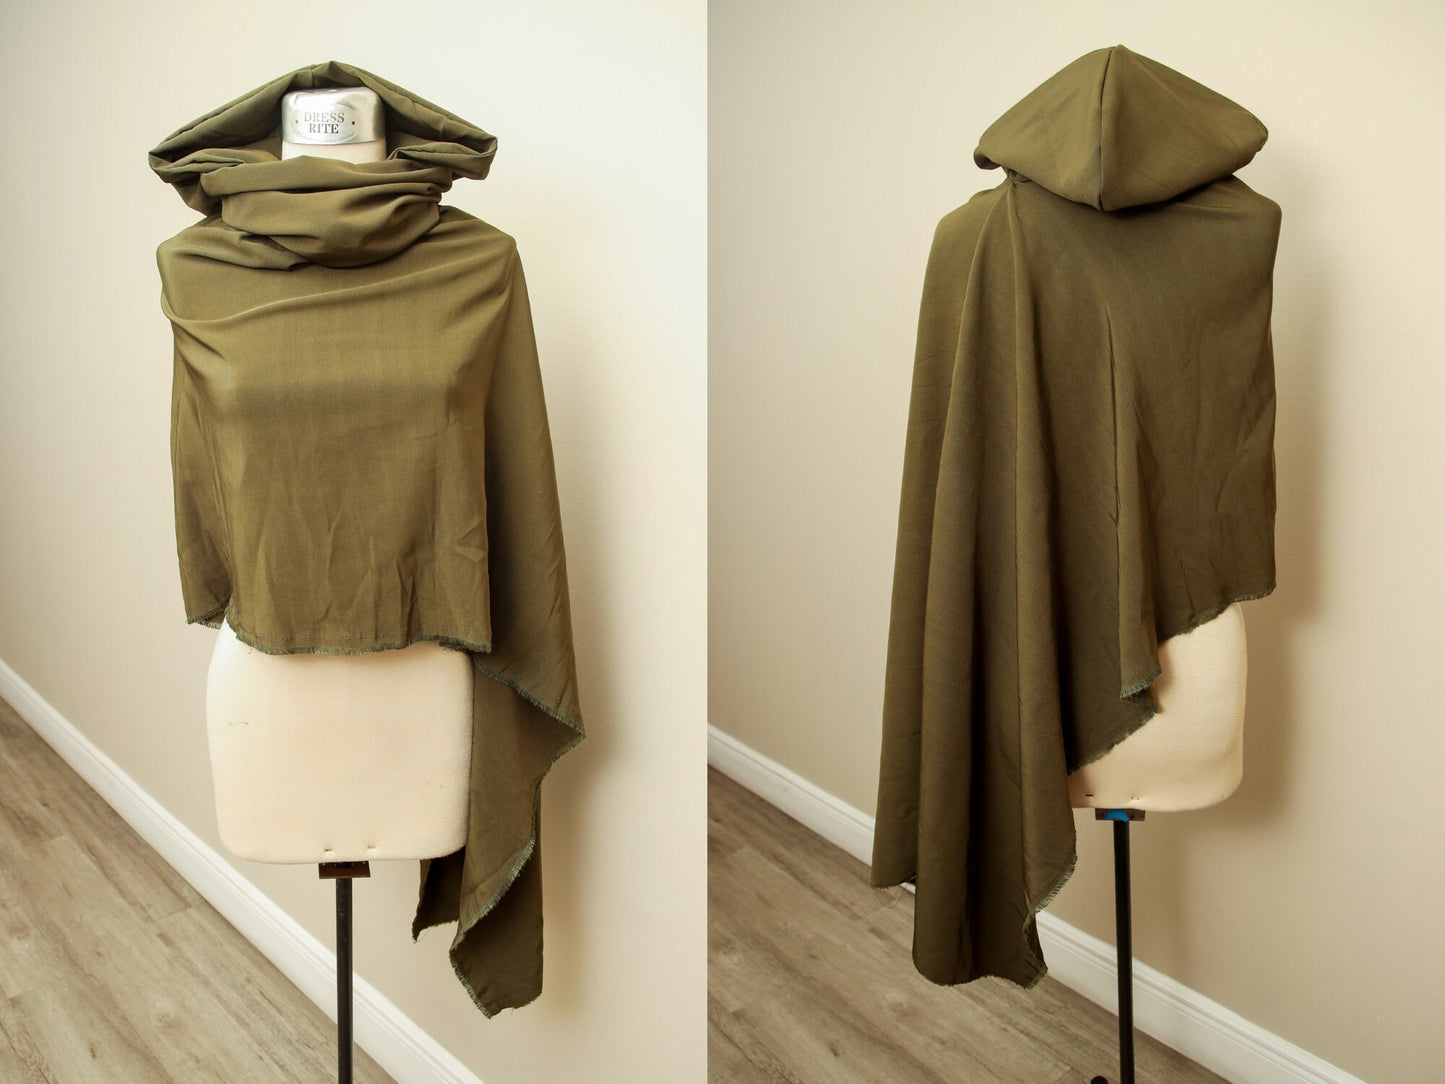 Olive Green Shoulder Cape | Woodland Goblincore Futuristic Cloak | Hooded Cowl Apocalyptic Capelet | Asymmetrical Cyberpunk Sleeveless Top